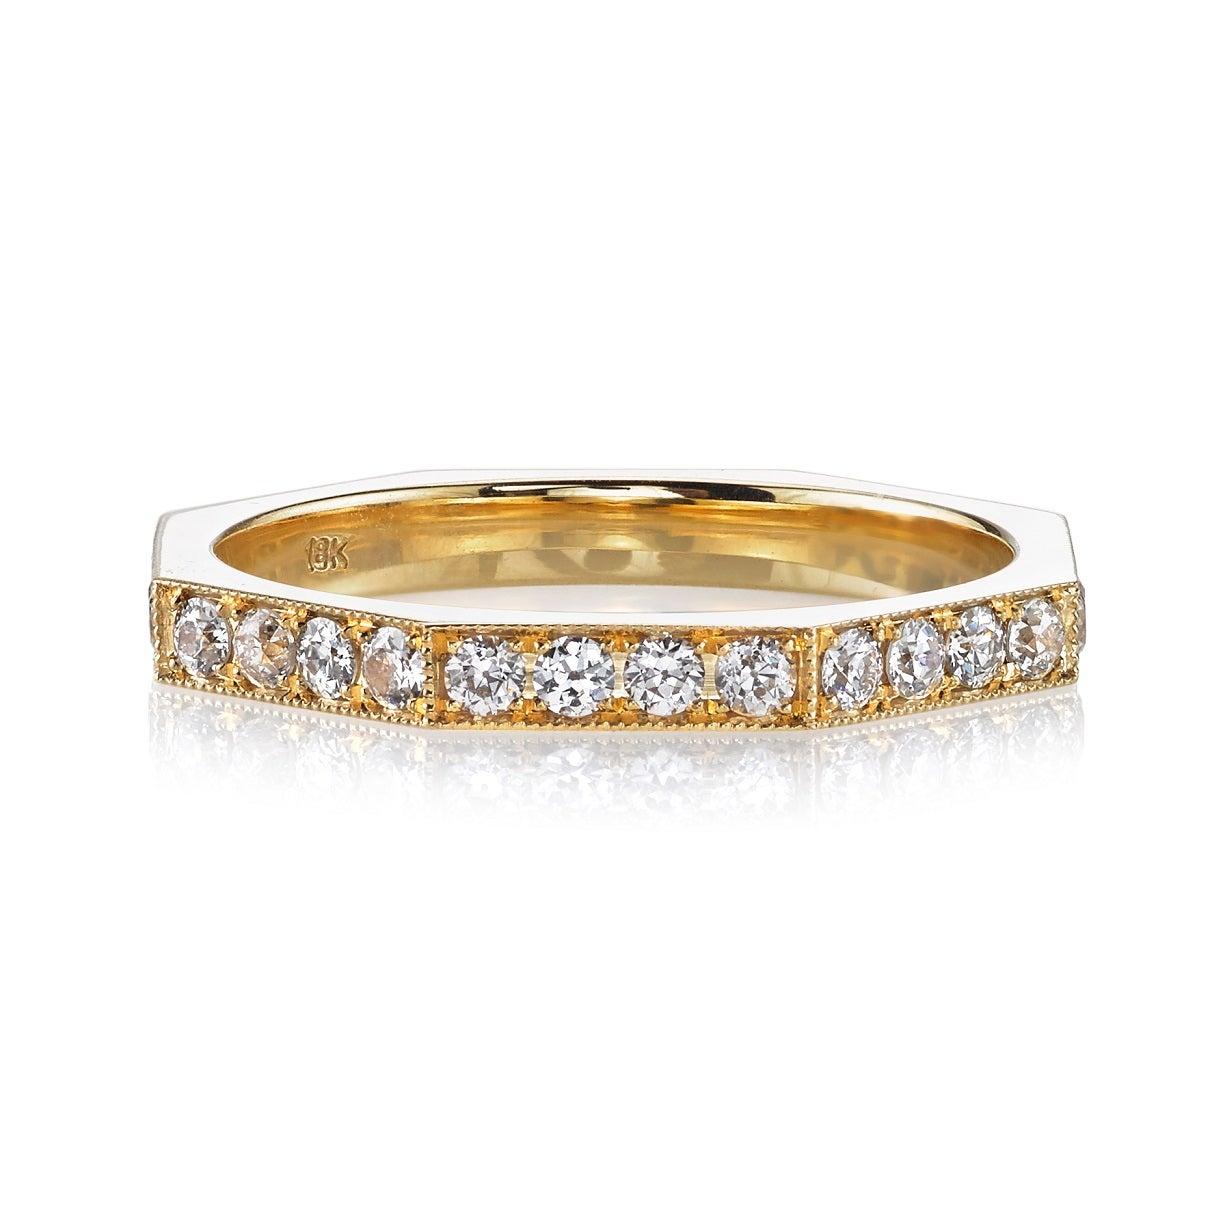 For Sale:  Handcrafted Reilyn Old European Cut Diamond Eternity Band by Single Stone 2